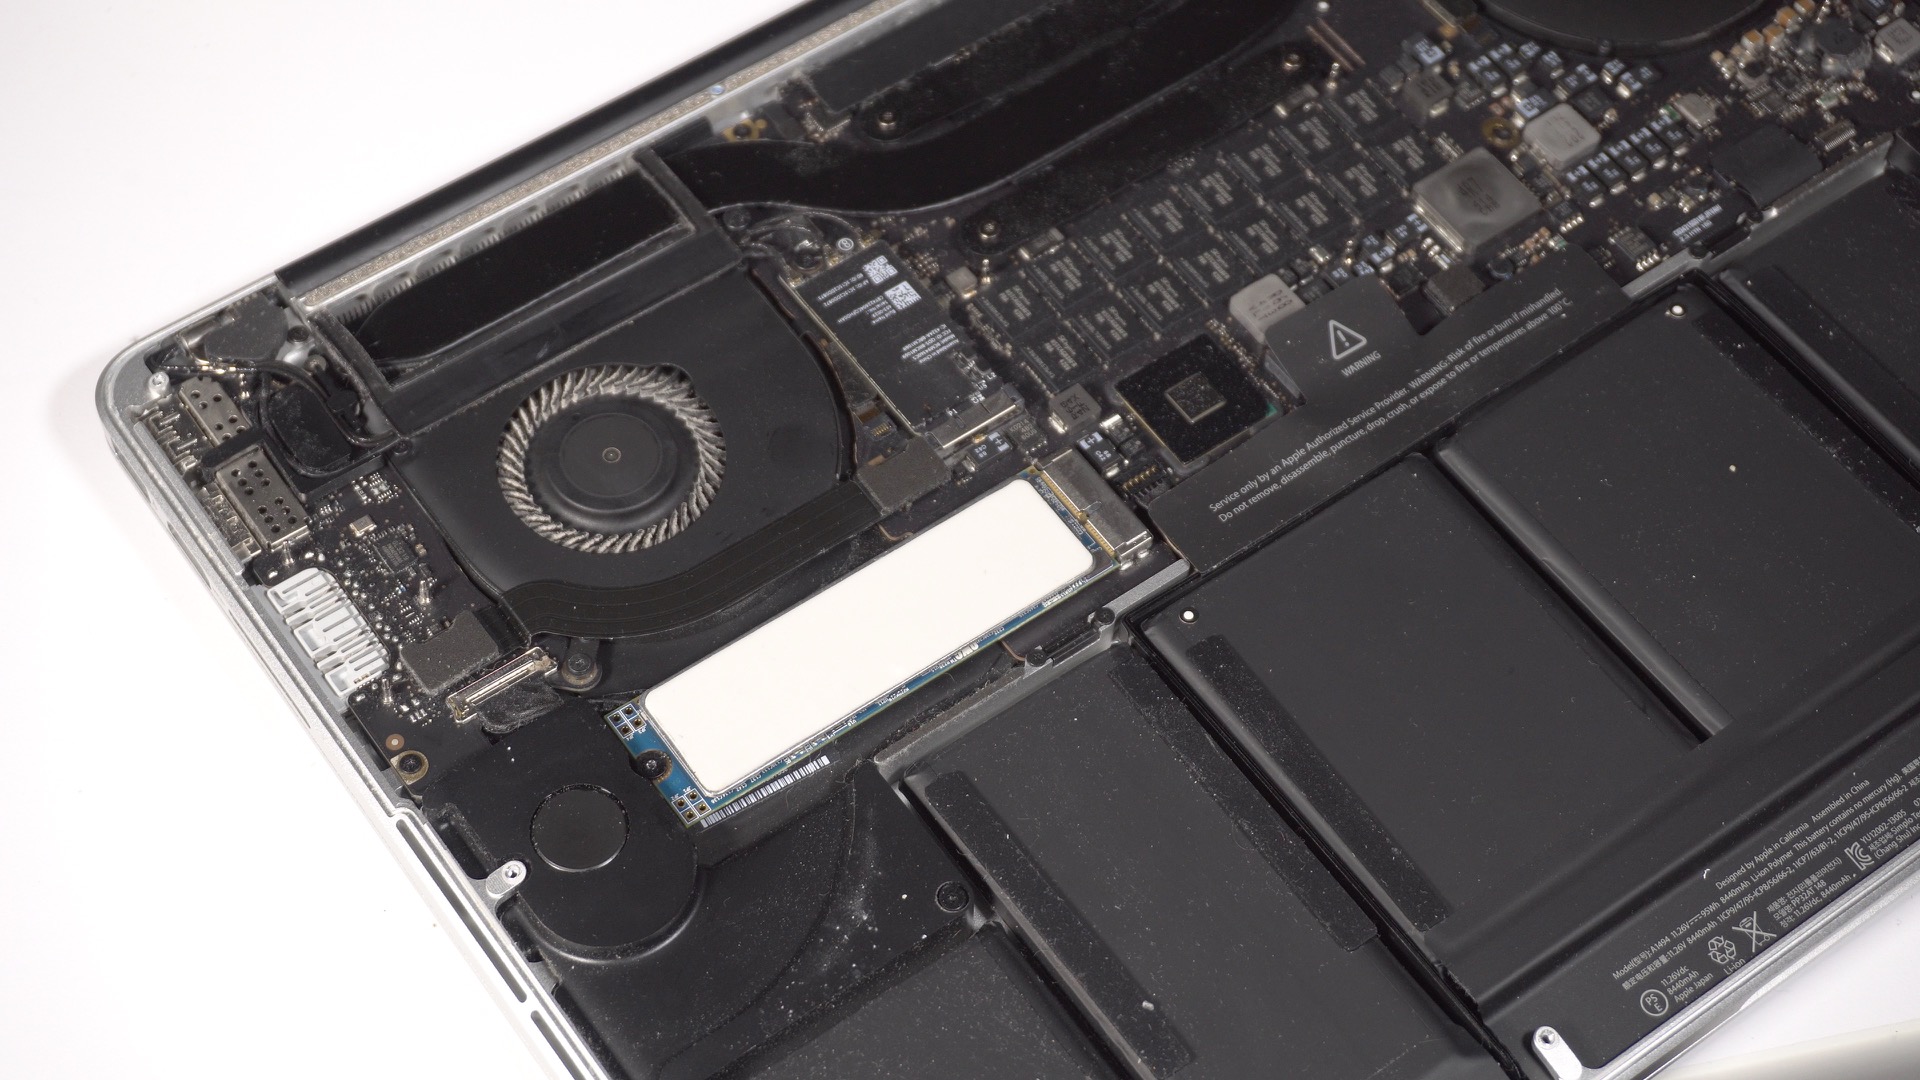 MacBook Pro with Retina Display back cover battery exposed